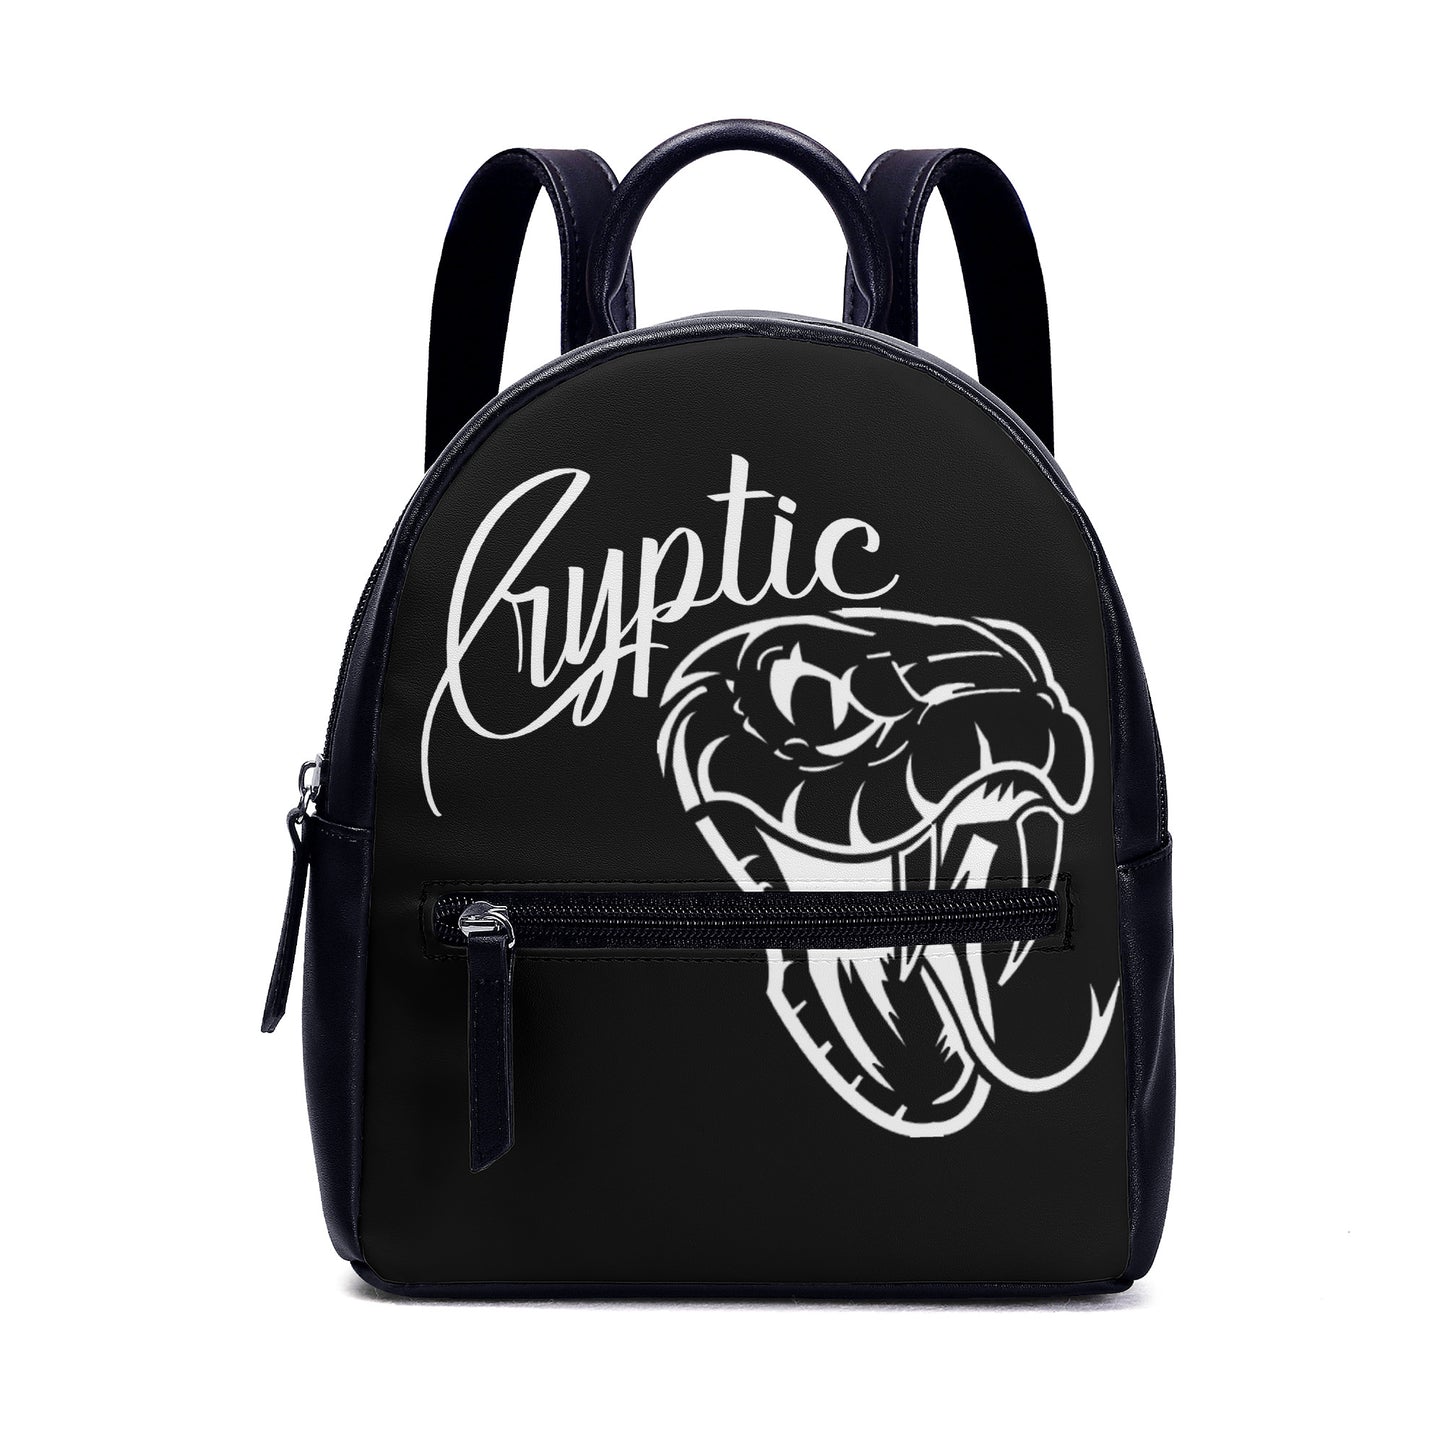 Cryptic 24" Backpack, Black